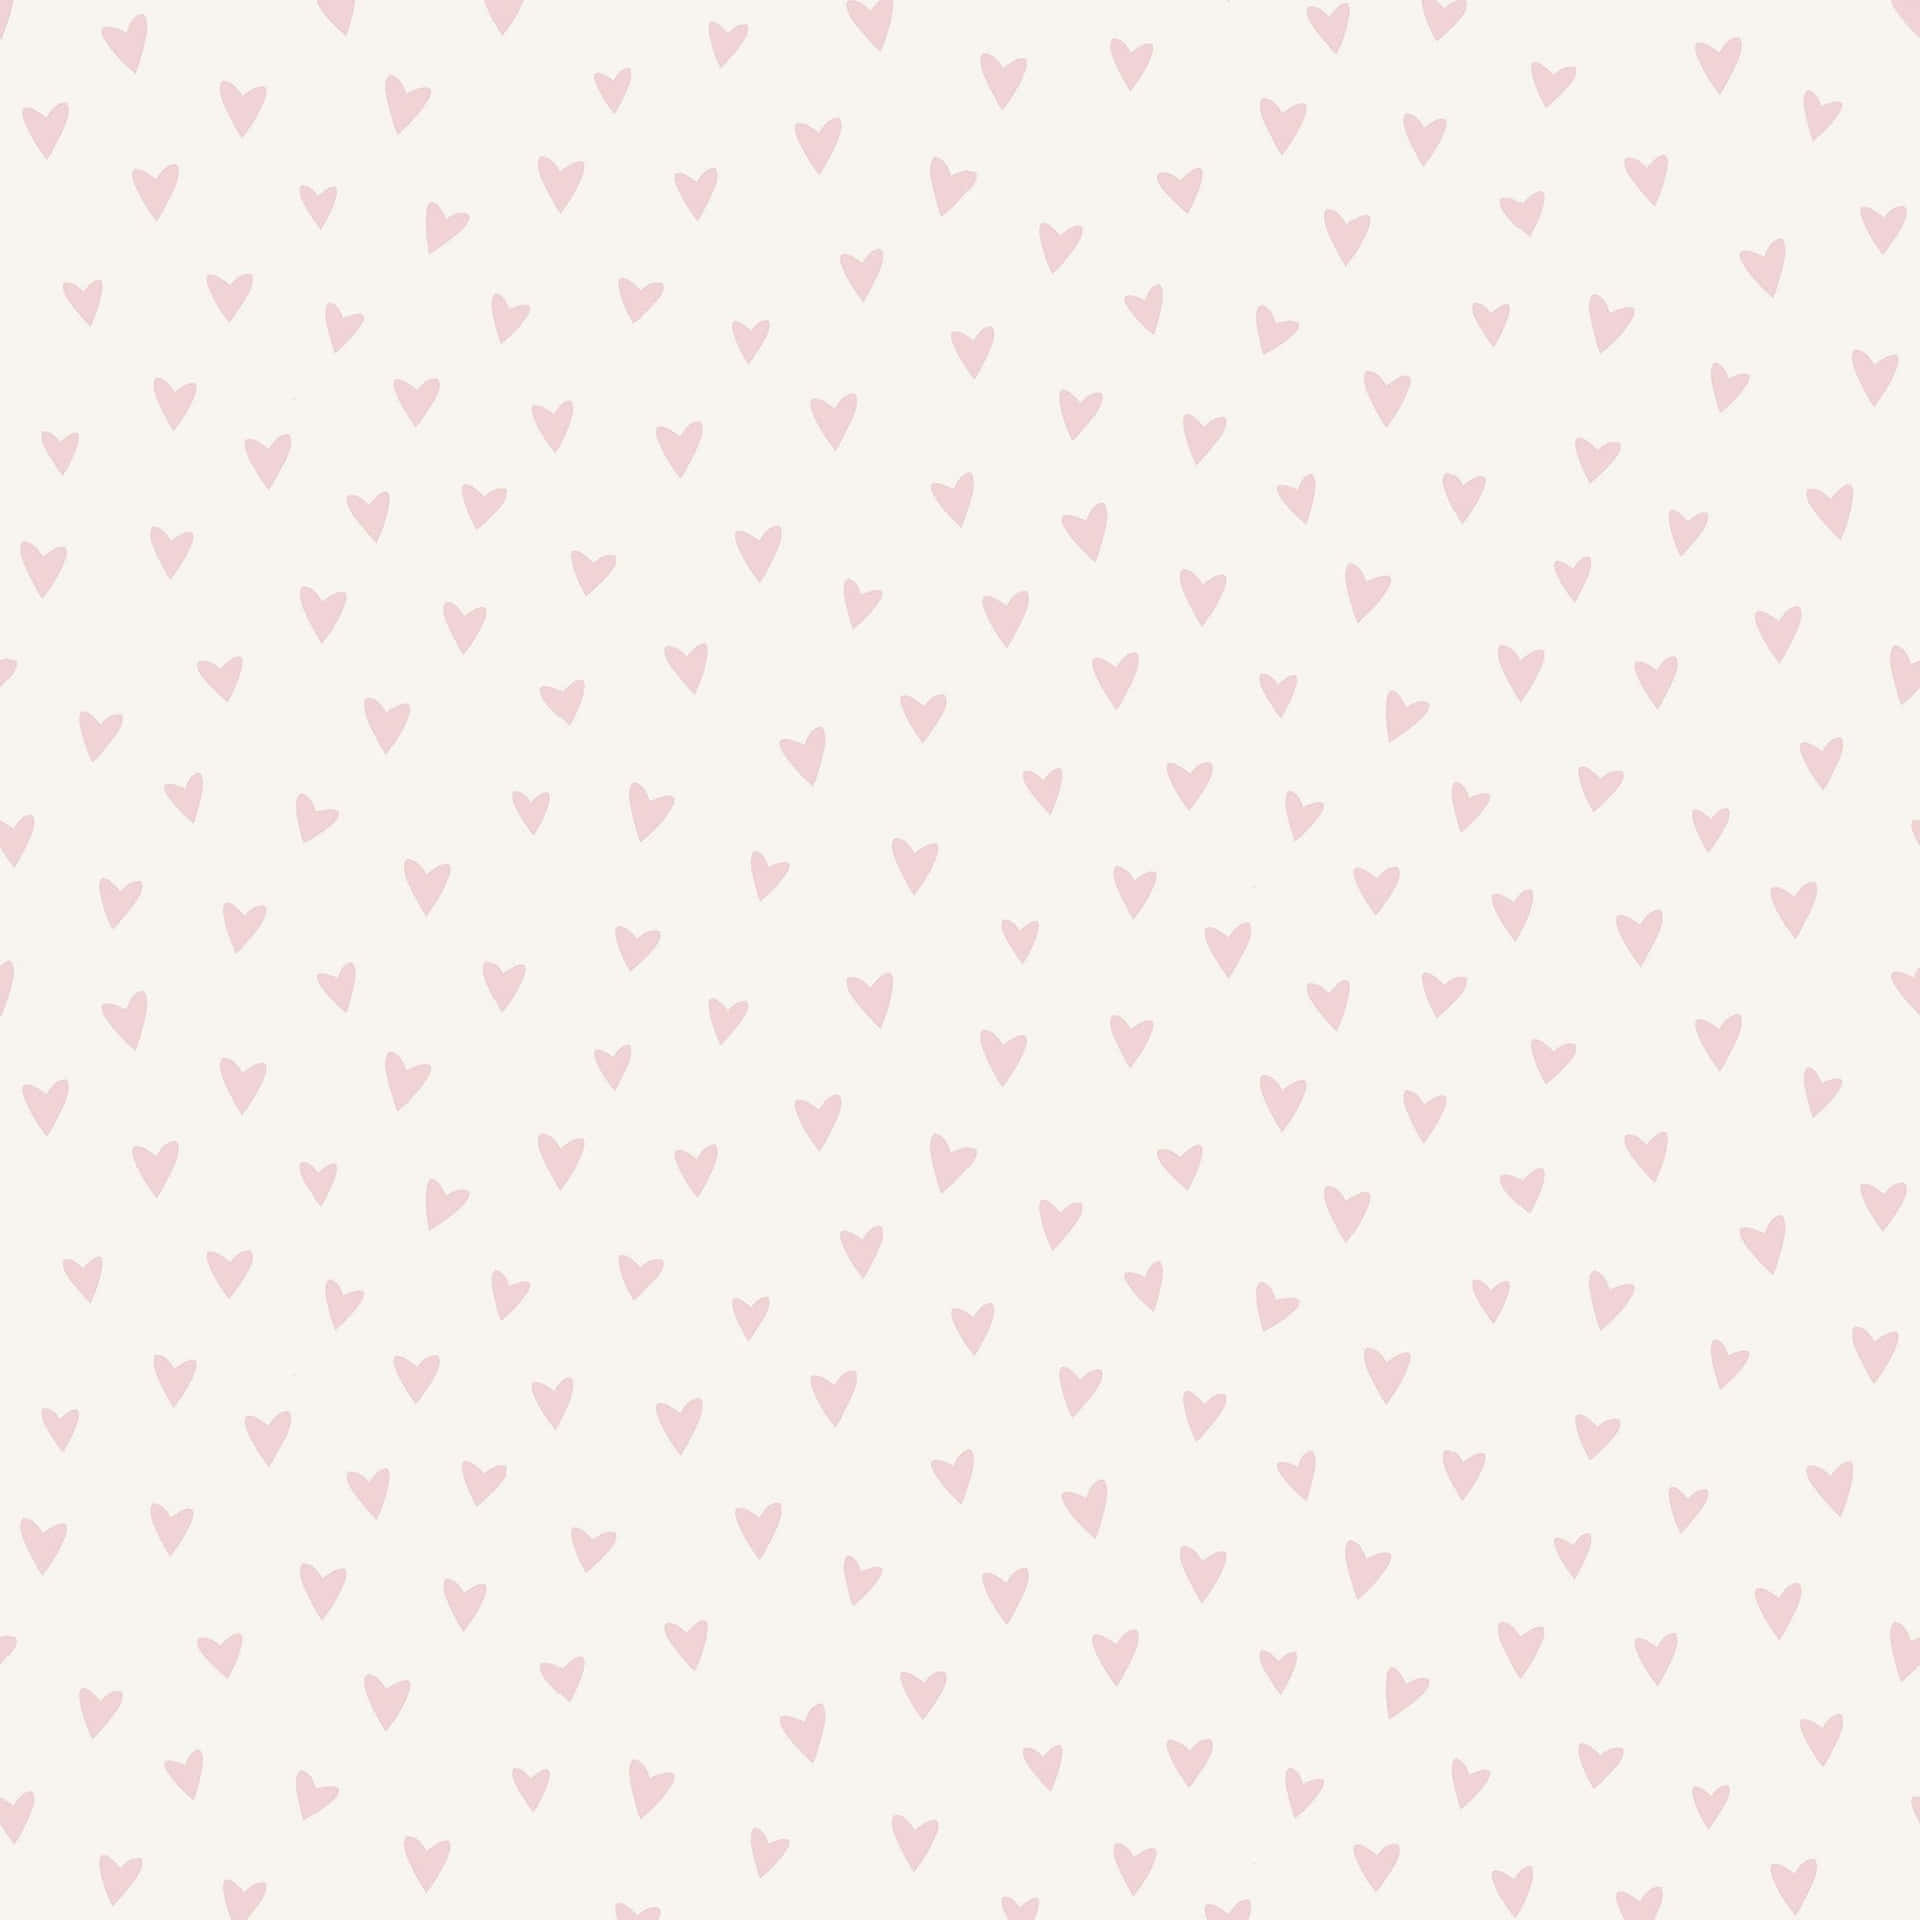 A sparkly display of pink glitter hearts. Wallpaper